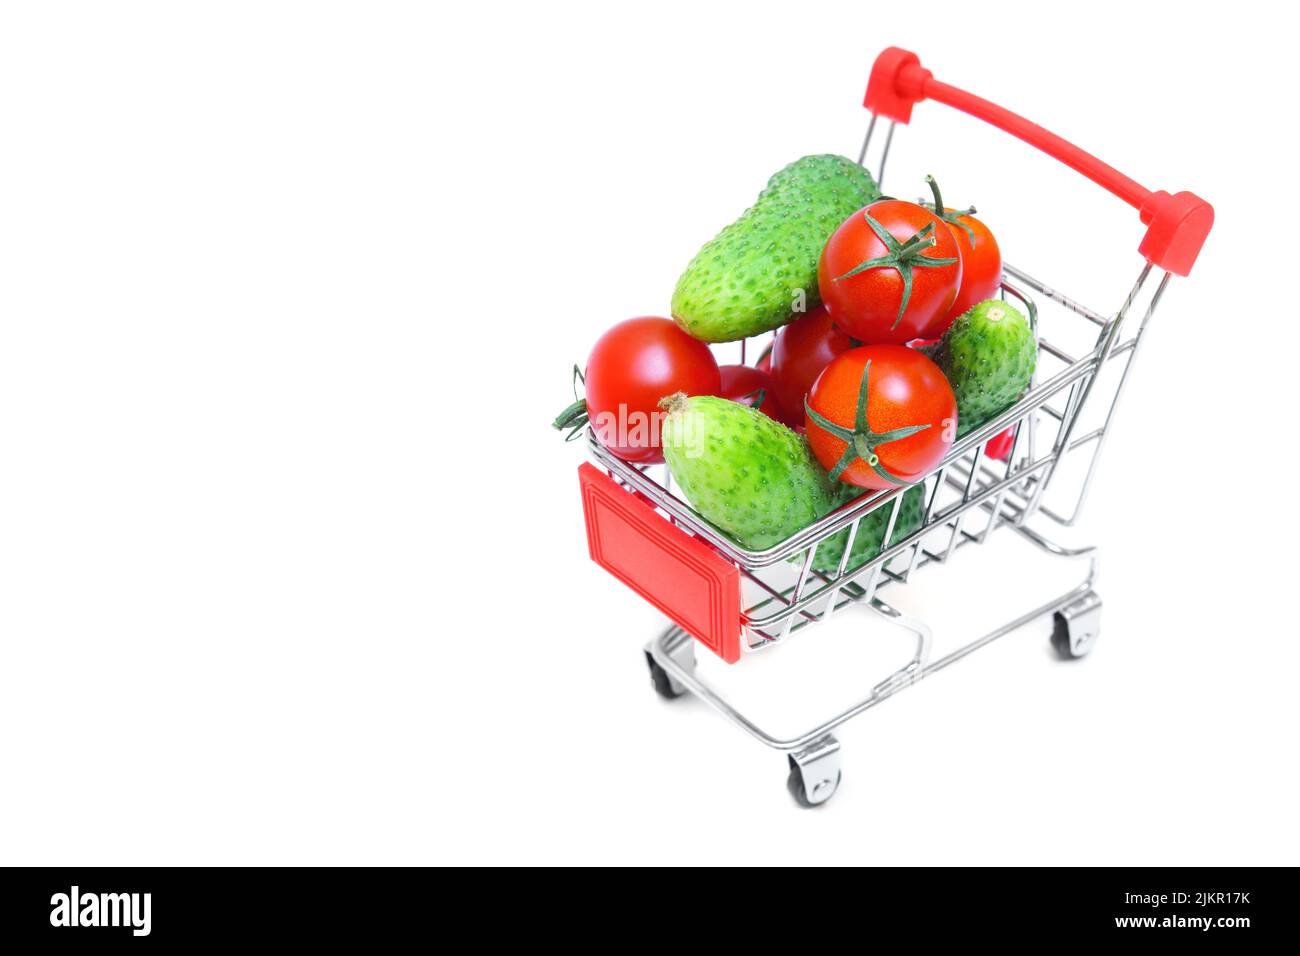 Pile of fresh cucumbers and cherry tomatoes in a miniature shopping trolley isolated on white background. Veggies straight from the farm. Stock Photo